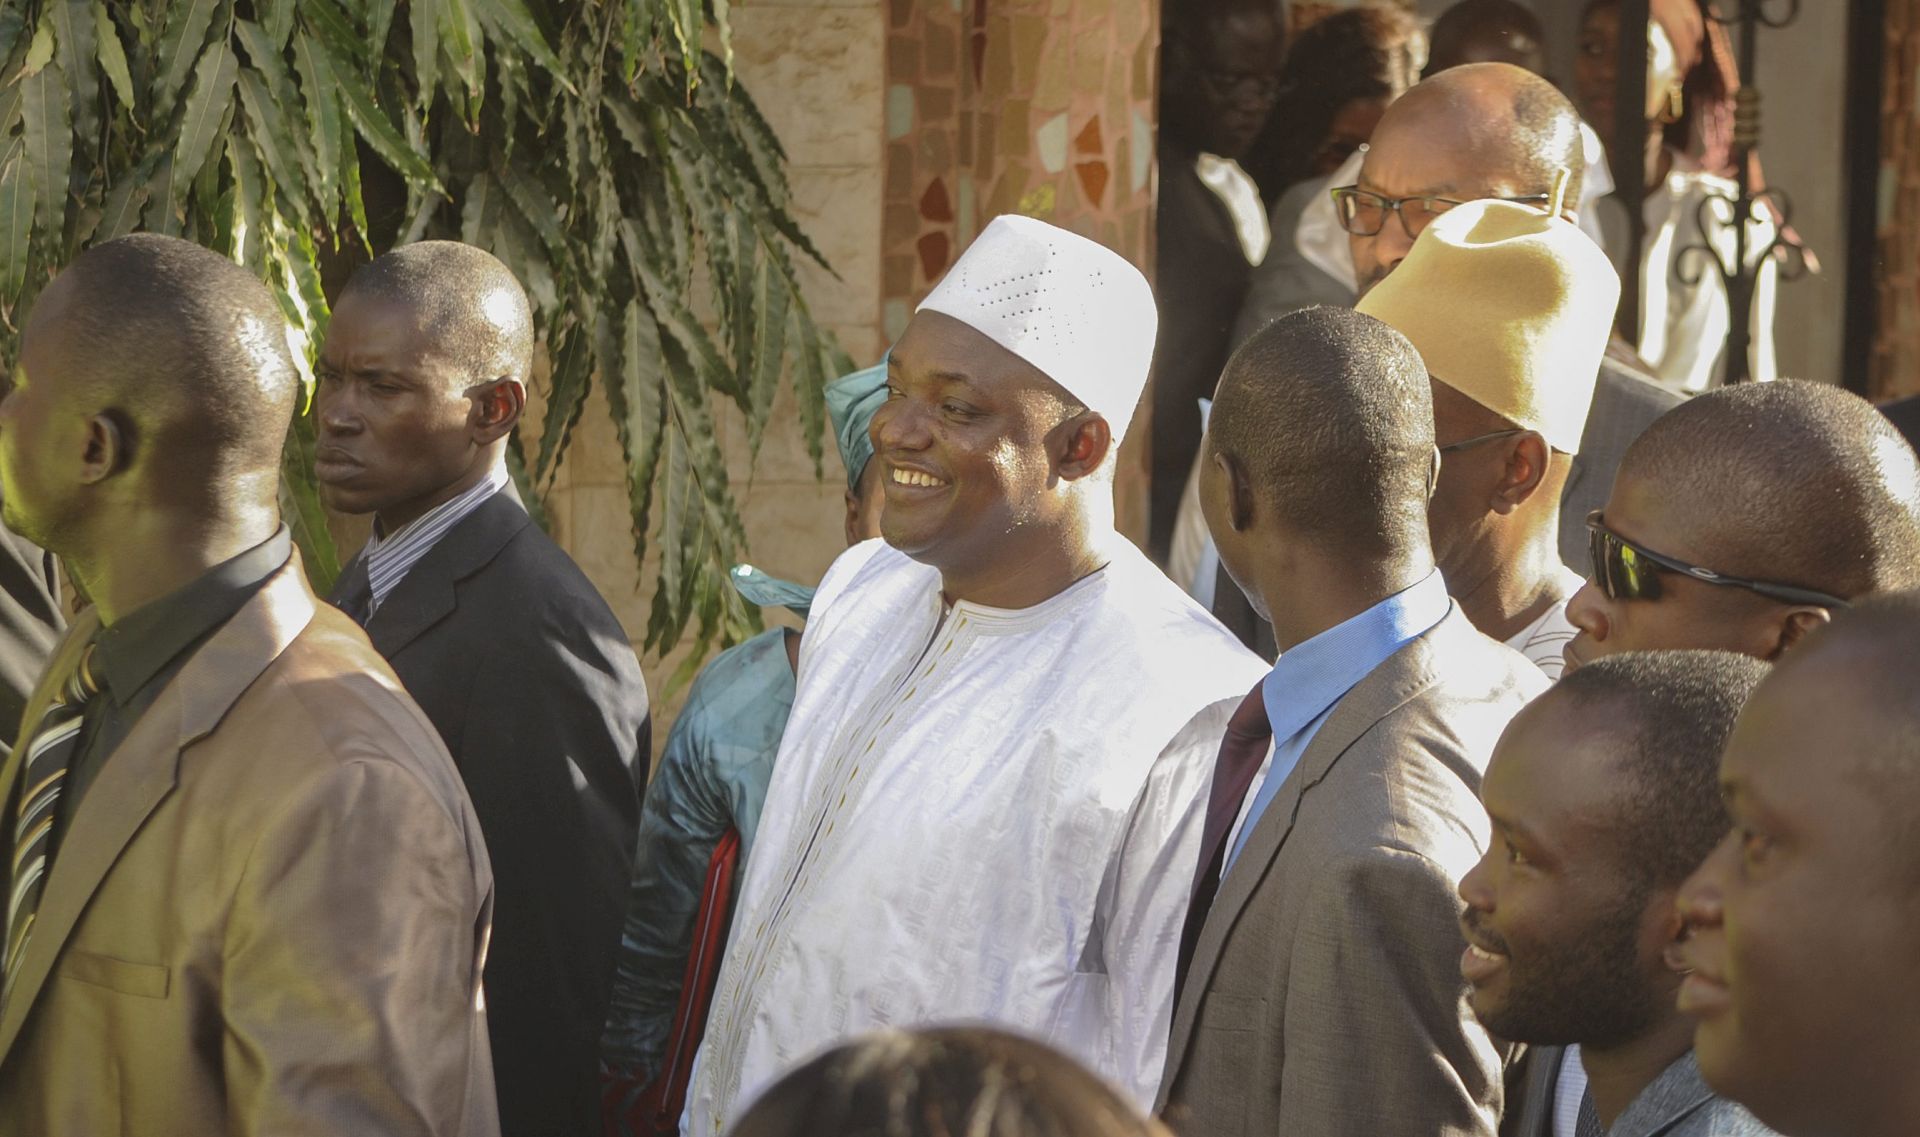 epa05732056 President-elect of Gambia Adama Barrow (C) smiles at supporters cheering, after he was sworn in as president at the Gambia embassy in Dakar, Senegal, 19 January 2017. West African military forces are moving in to enforce the transfer of power removing President Yahya Jammeh following his refusal to accept election results.  EPA/STR